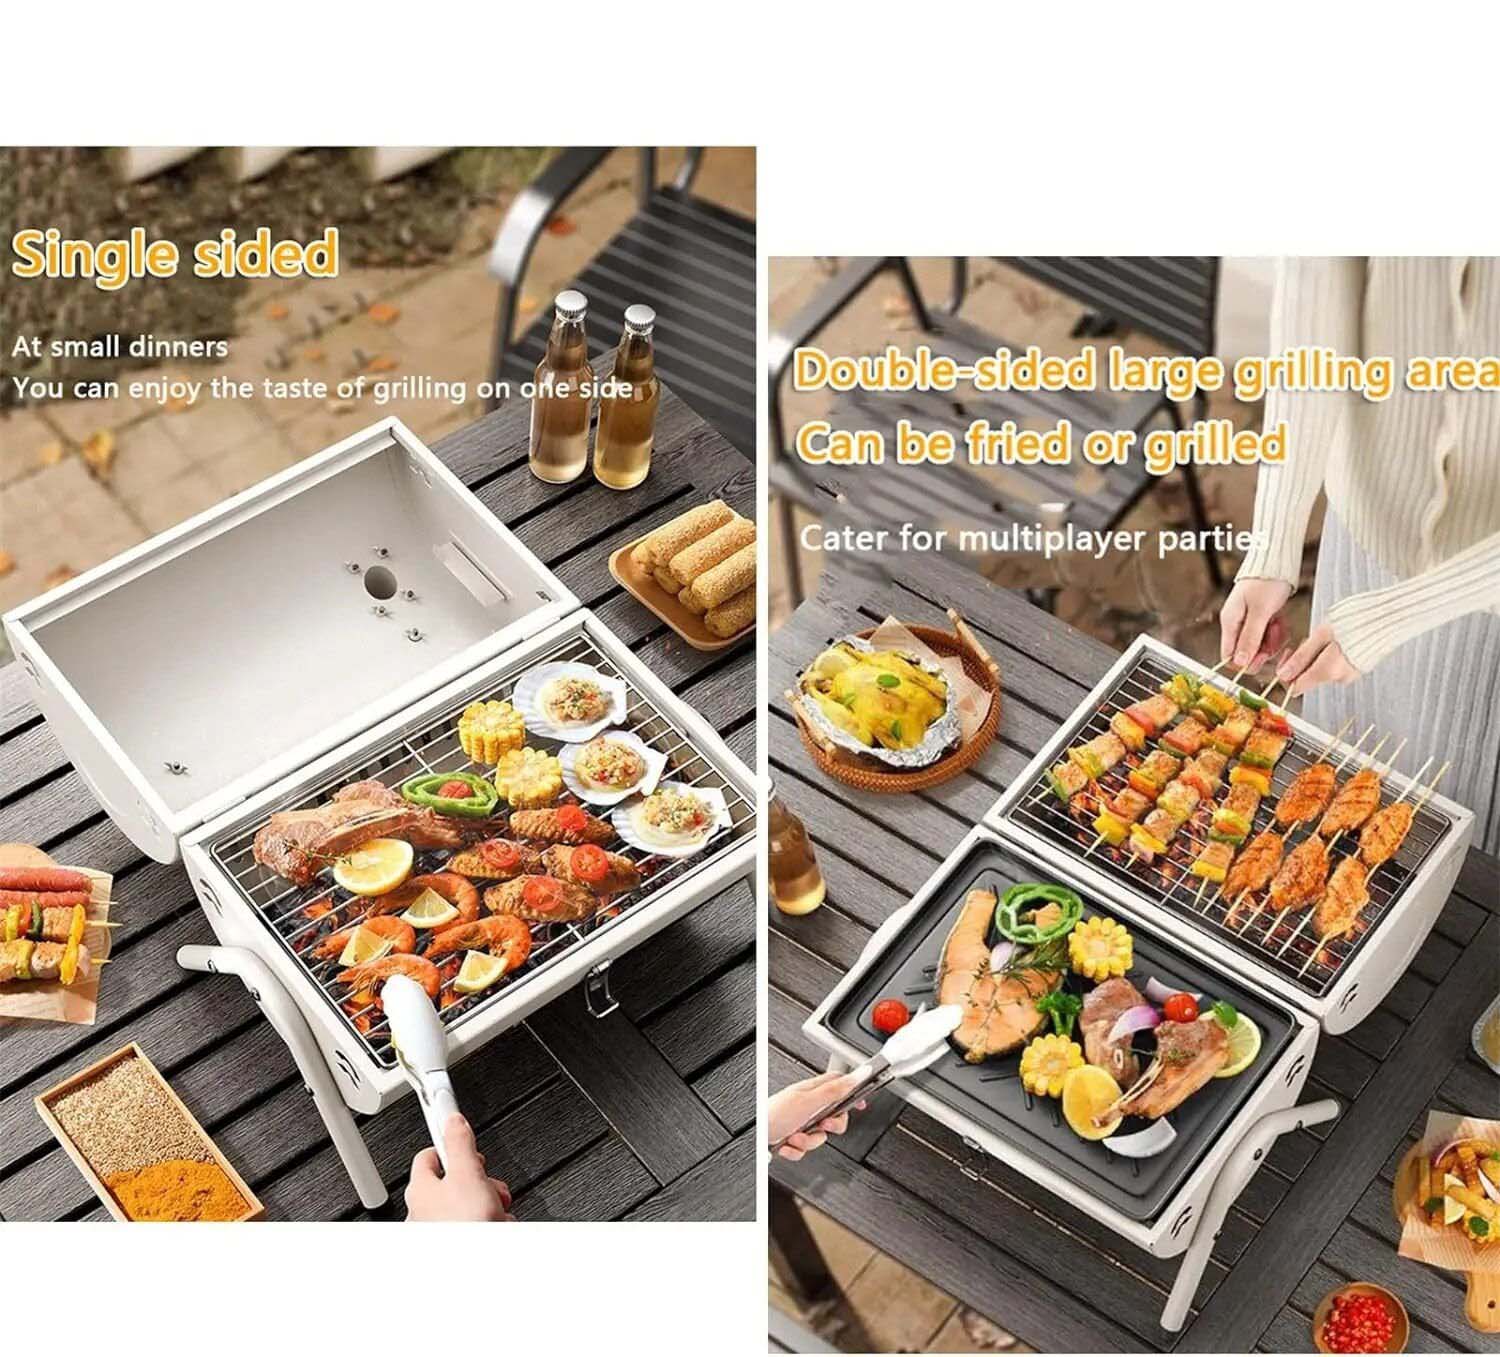 Portable charcoal grill for BBQ